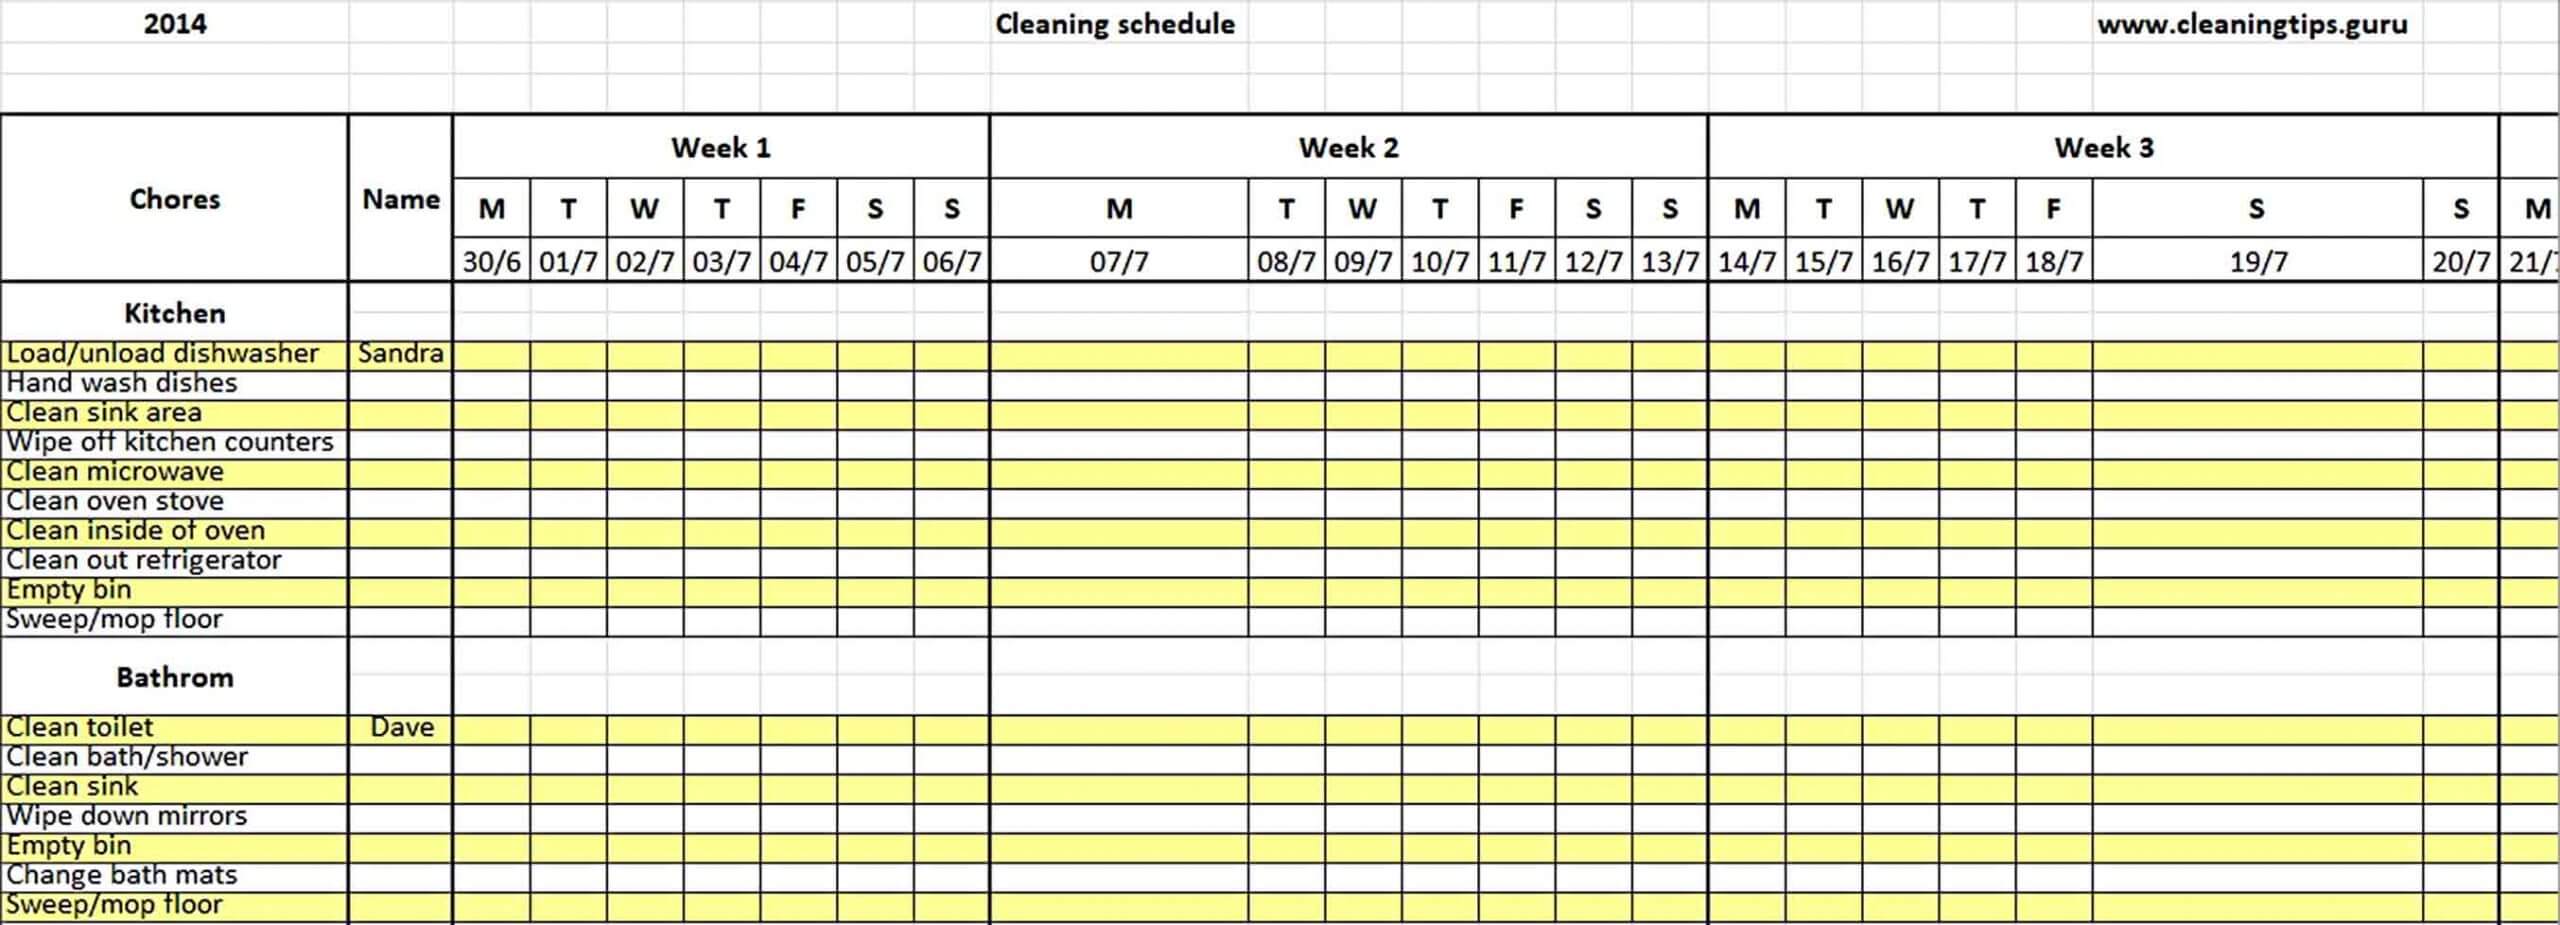 Excel Weekly Cleaning Schedule Template.doc